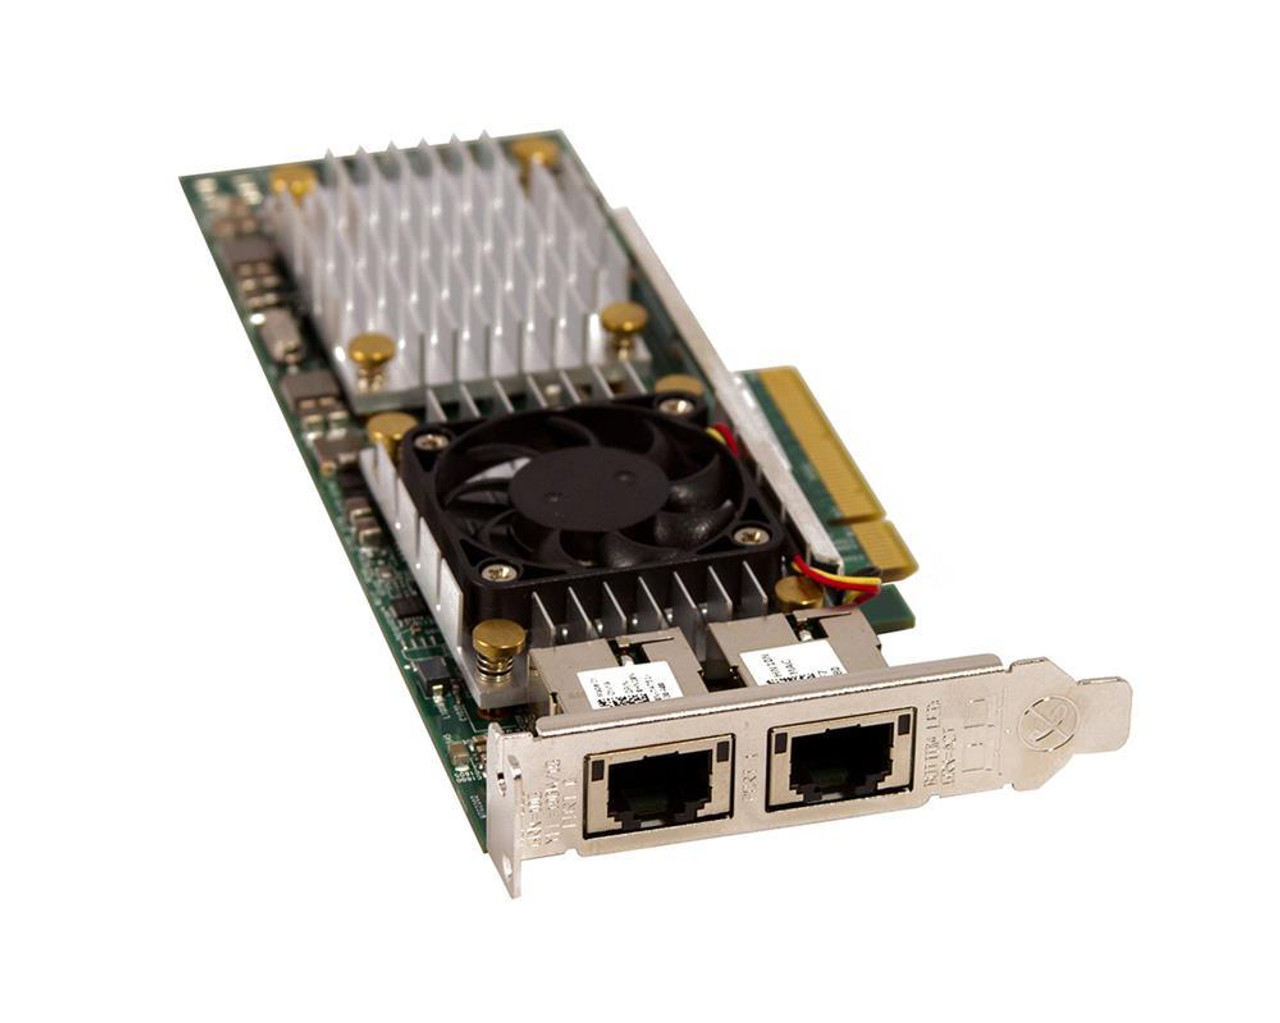 540-BBFO Dell Broadcom 57810s Dual-Ports SFP+ 10Gbps Gigabit Ethernet PCI Express 3.0 x8 Network Adapter for ProLiant DL160